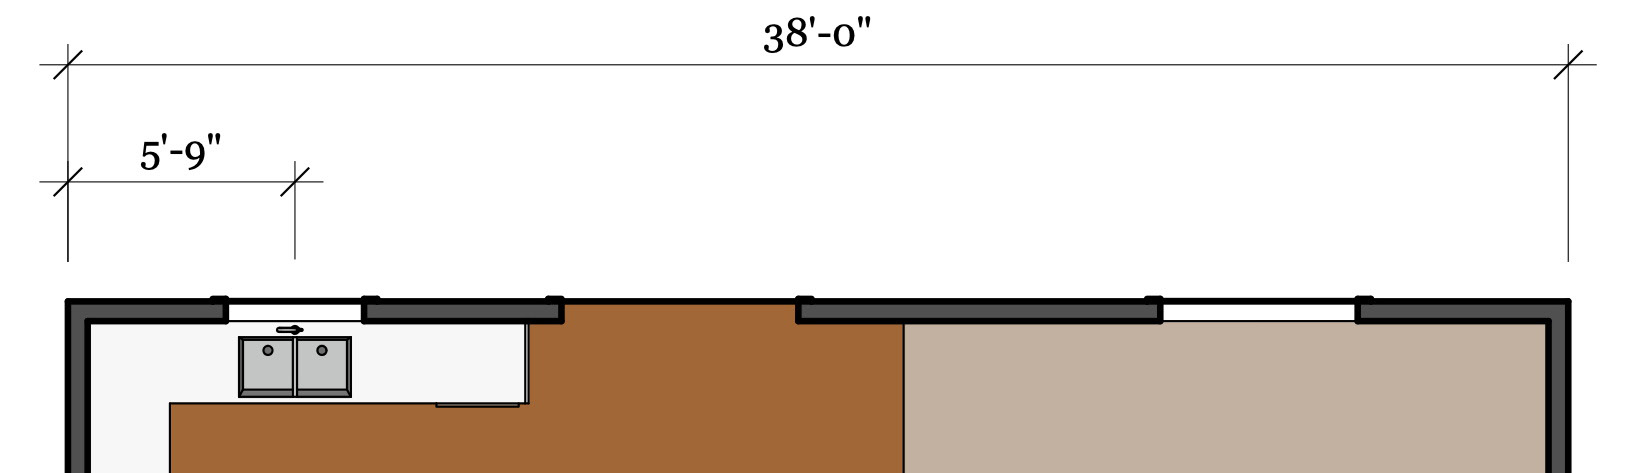 Figure 14.19 – Dimensions to the center of the first window
